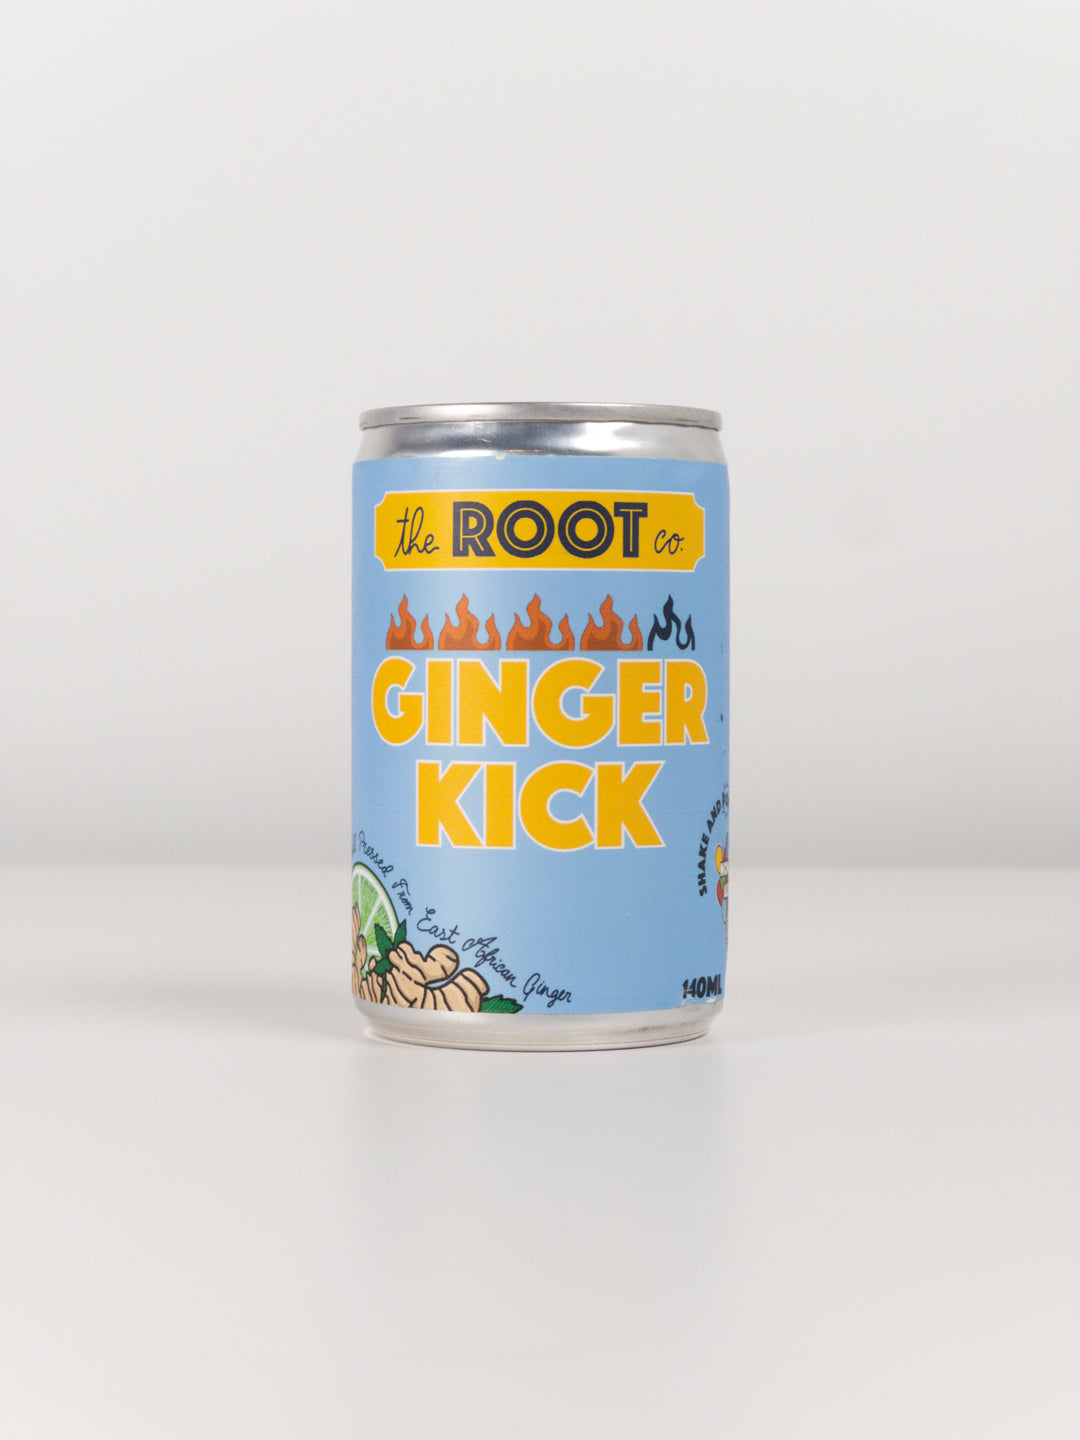 The Root | East African Root Ginger Kick